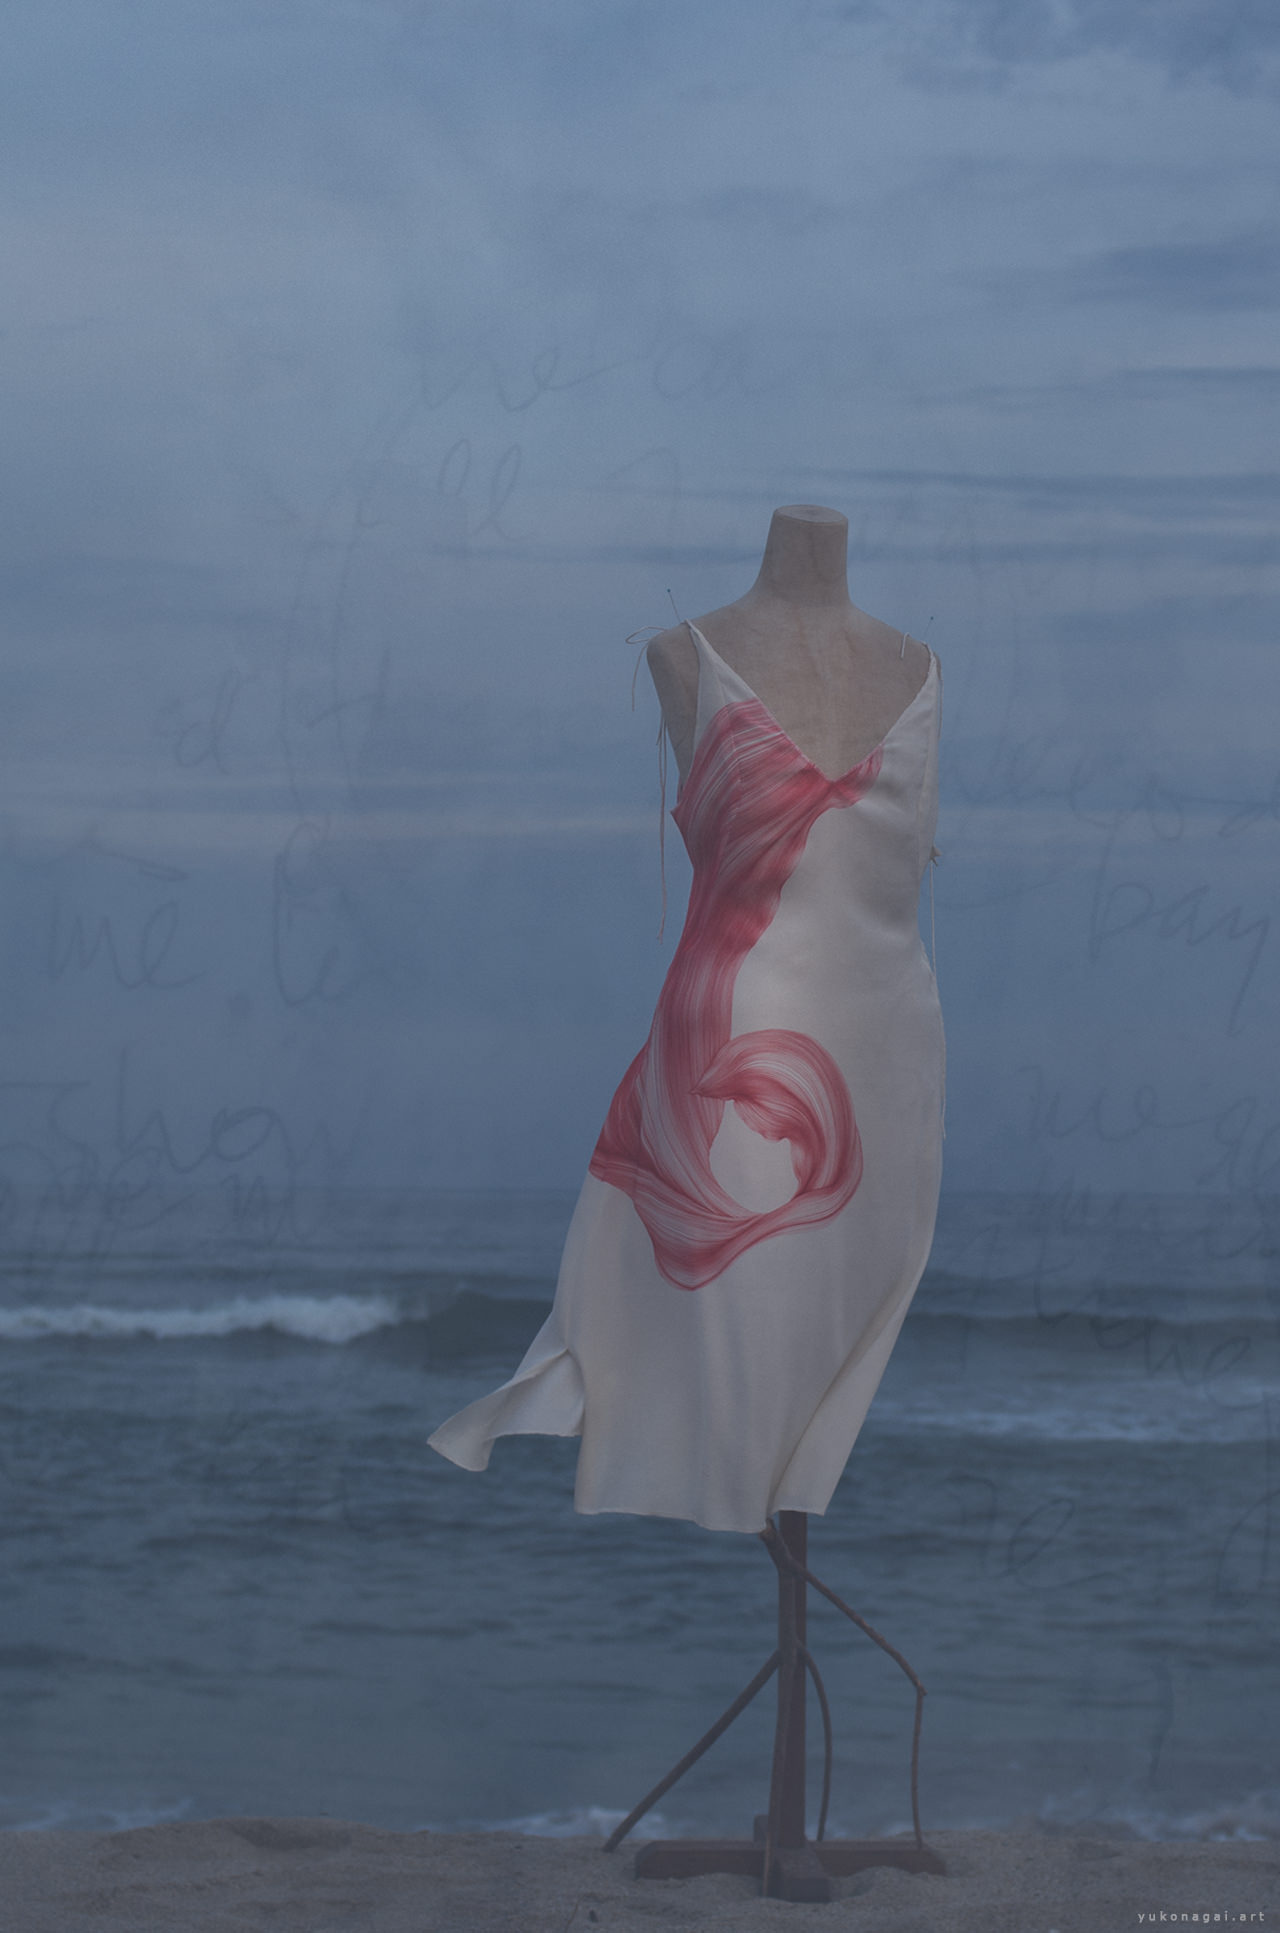 A dress with abstract line drawing of a flower petal on the beach, layered with handwritten letters.